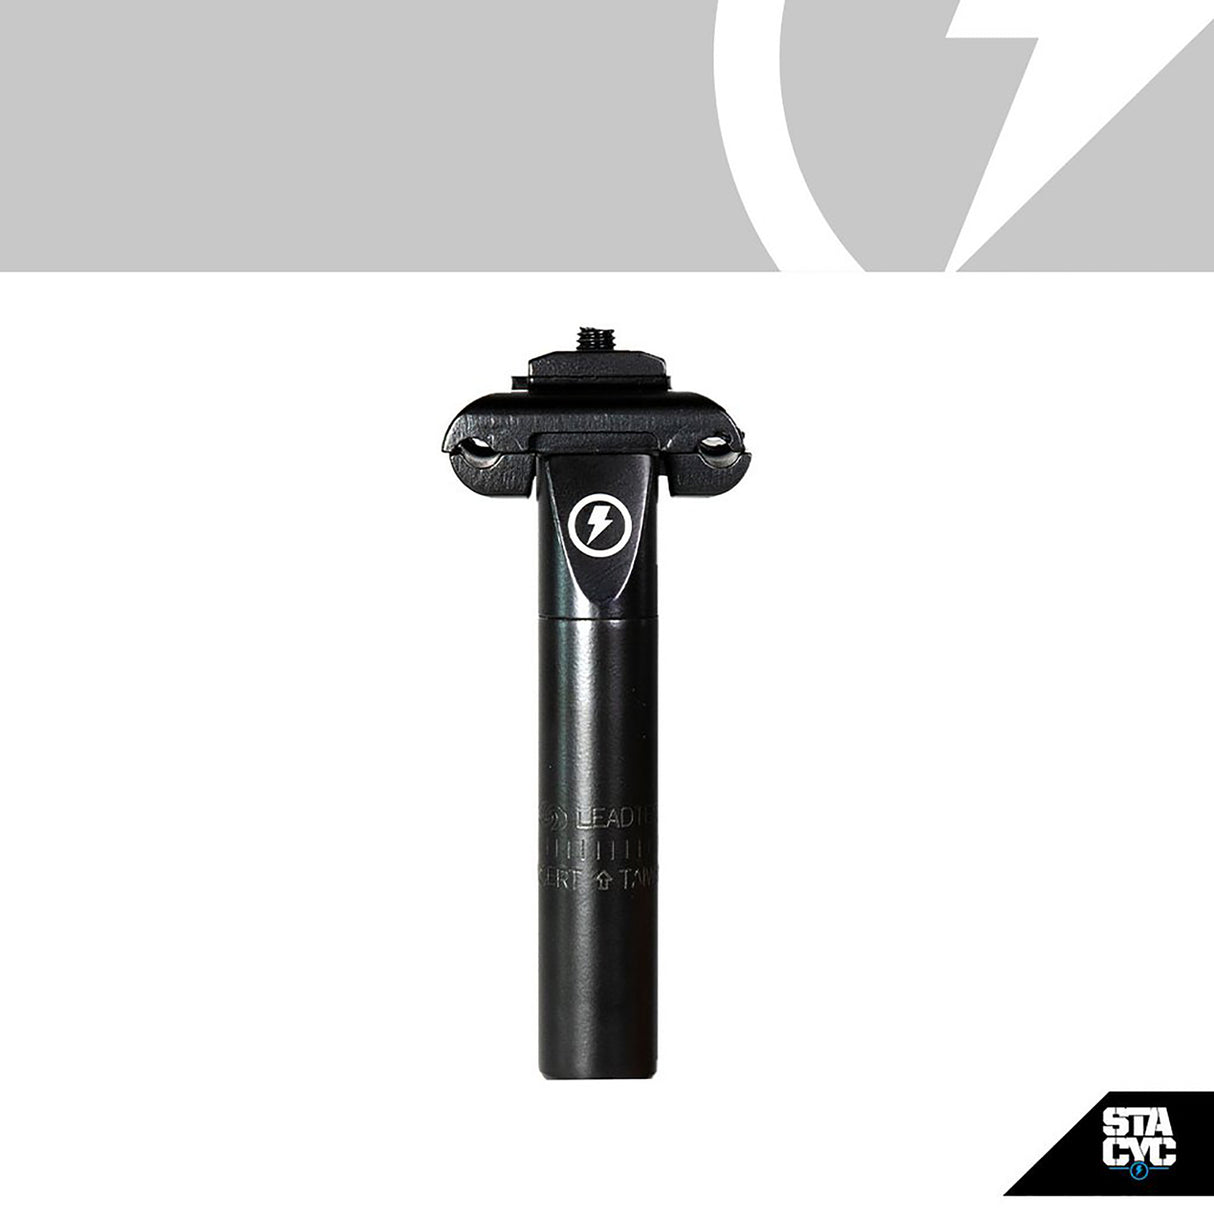 STACYC 135MM SEAT POST FOR 16 EDRIVE